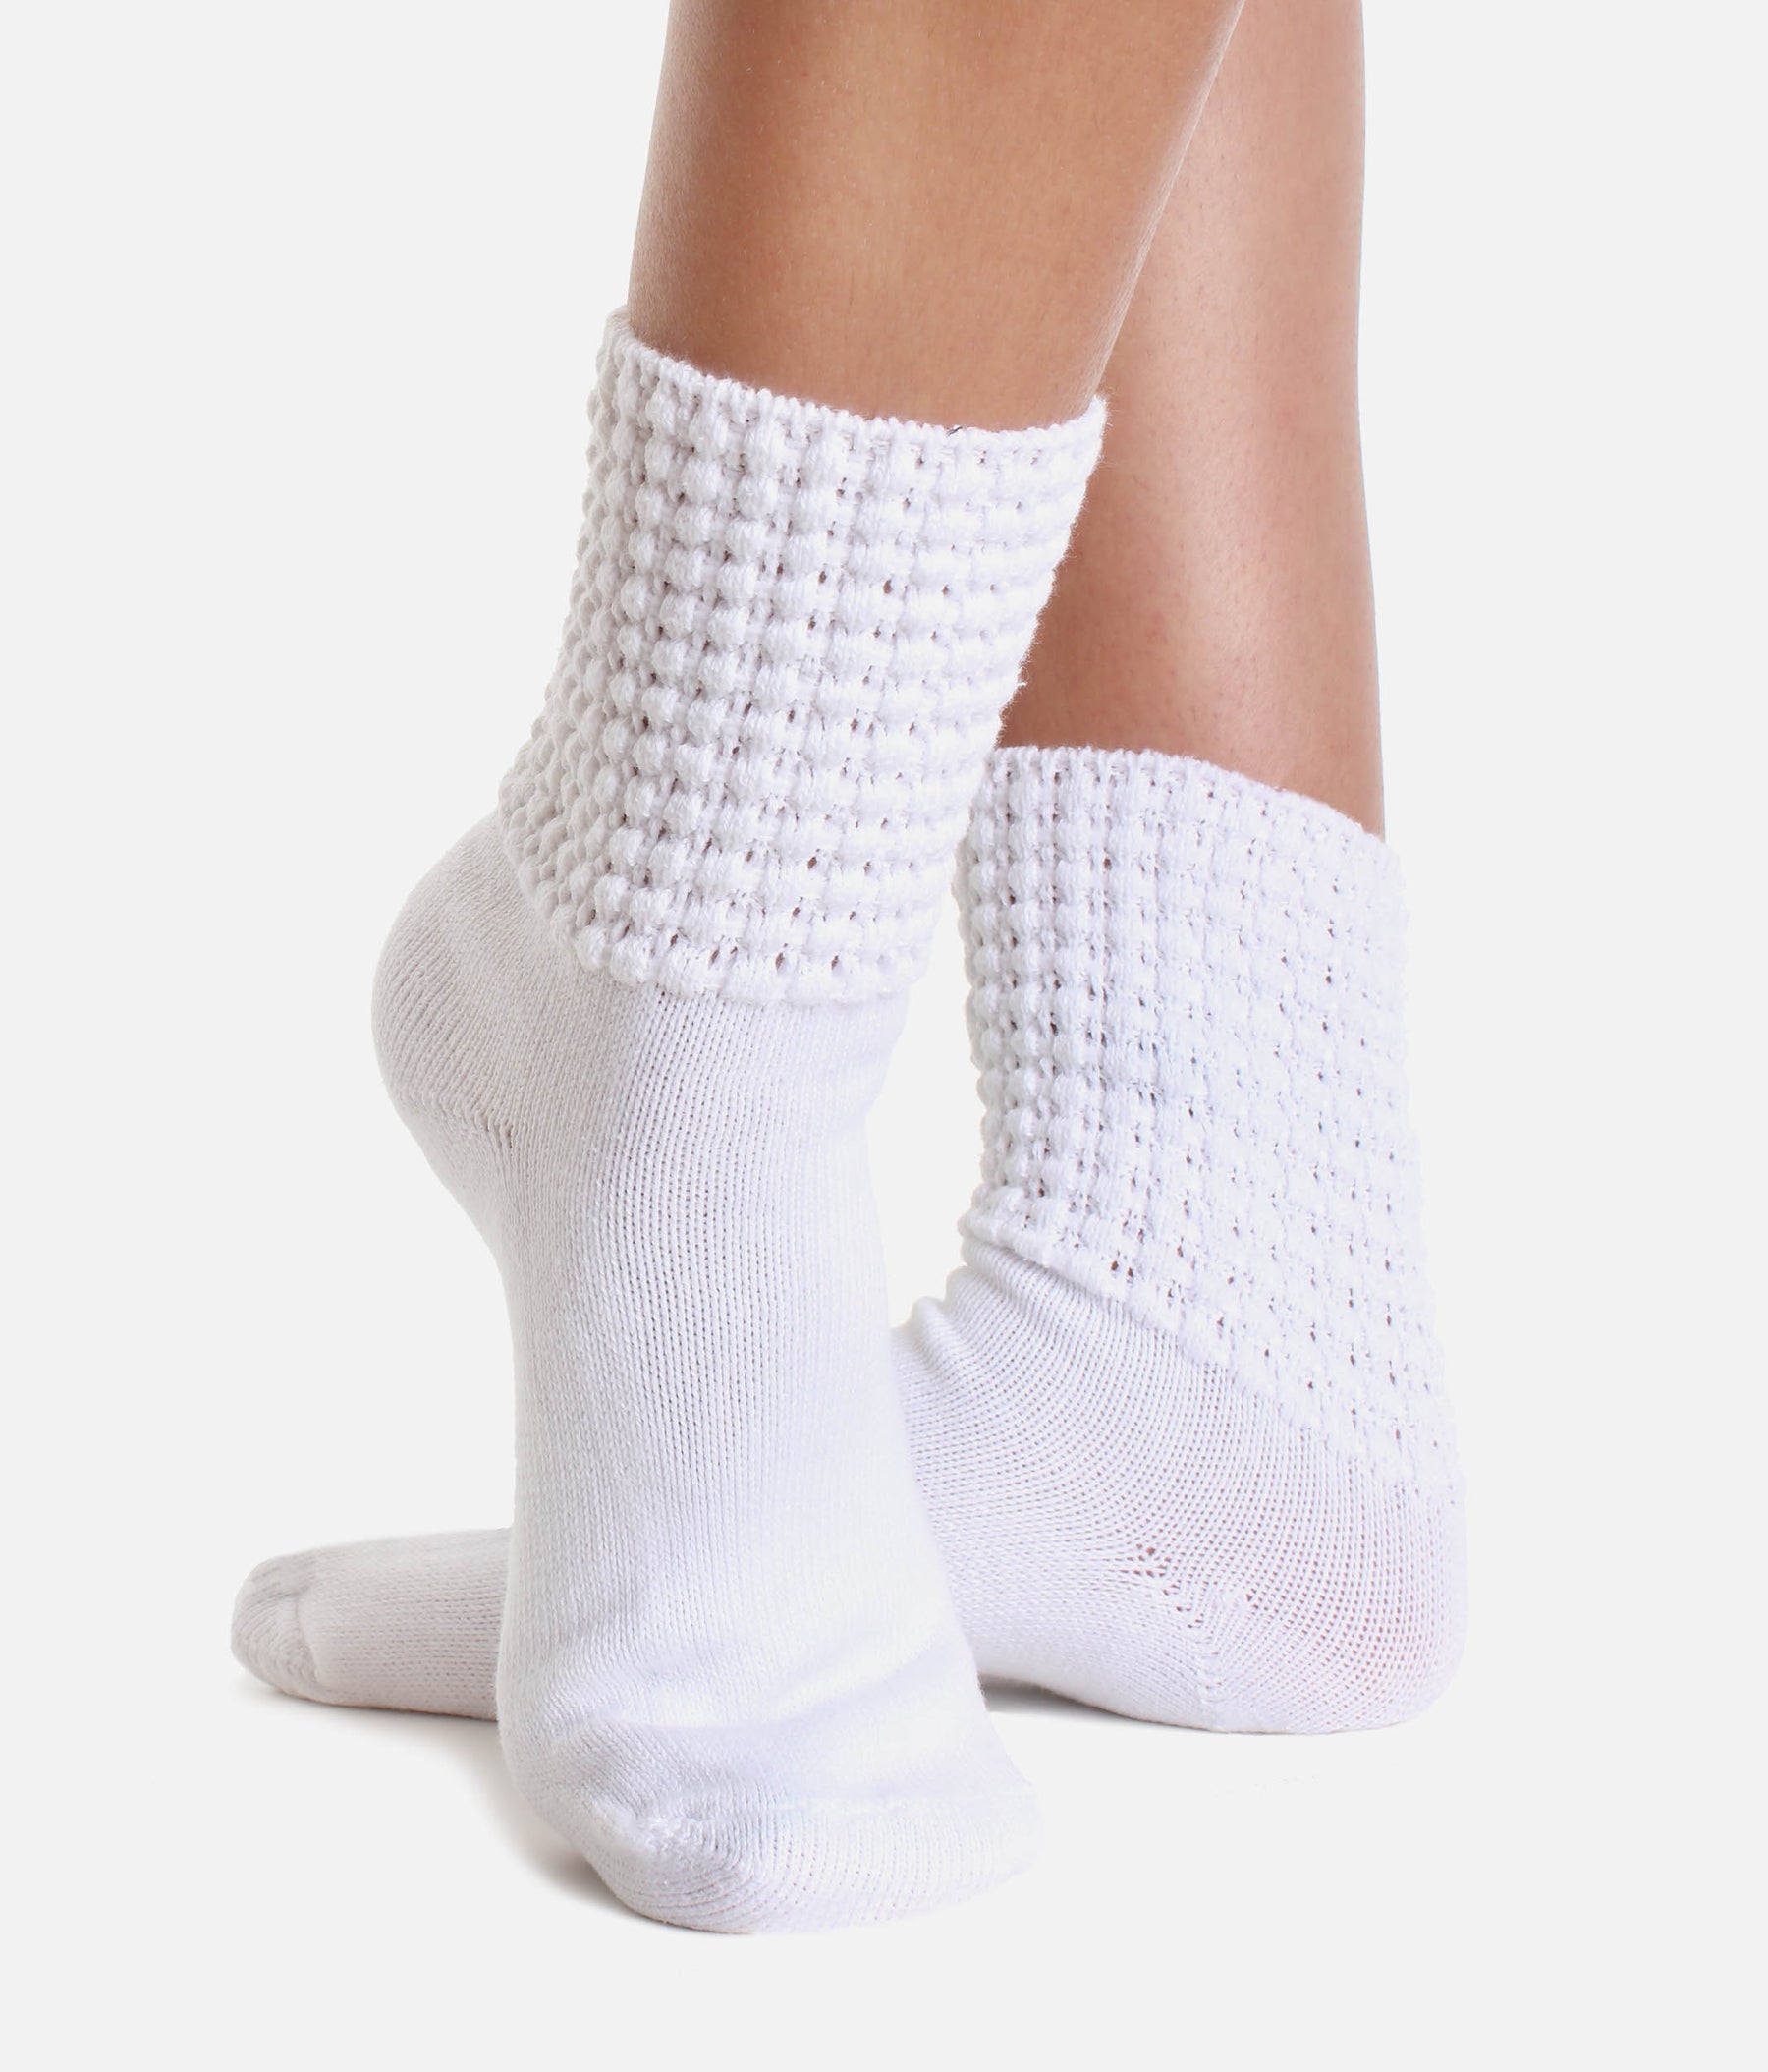 IRISH DANCE SOCKS ANKLE Length Arch Support Seamless Poodle Socks made in UK